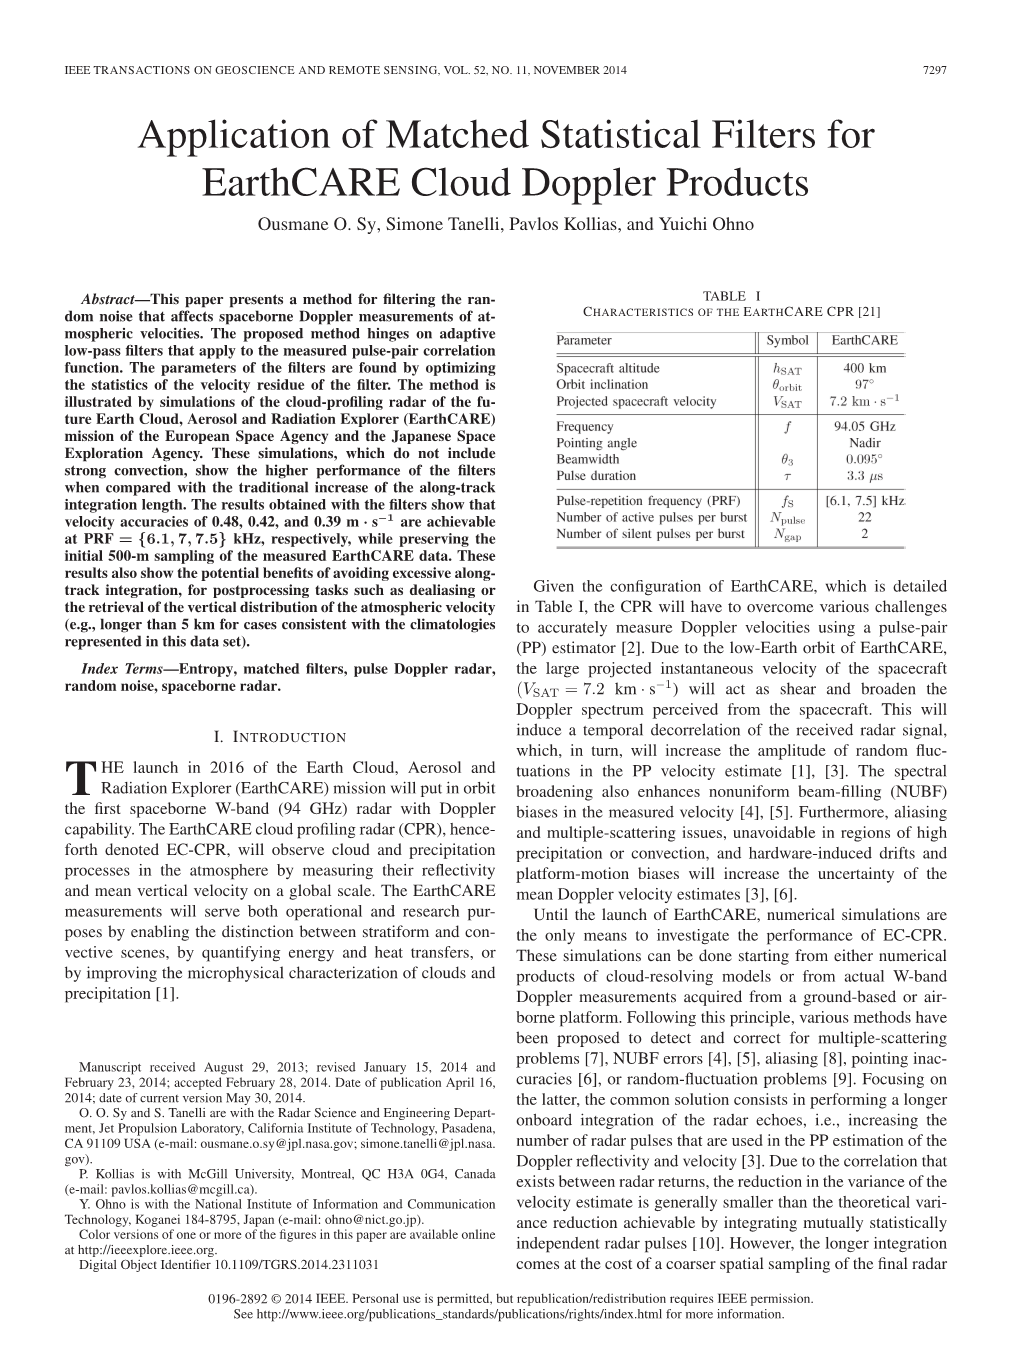 Application of Matched Statistical Filters for Earthcare Cloud Doppler Products Ousmane O